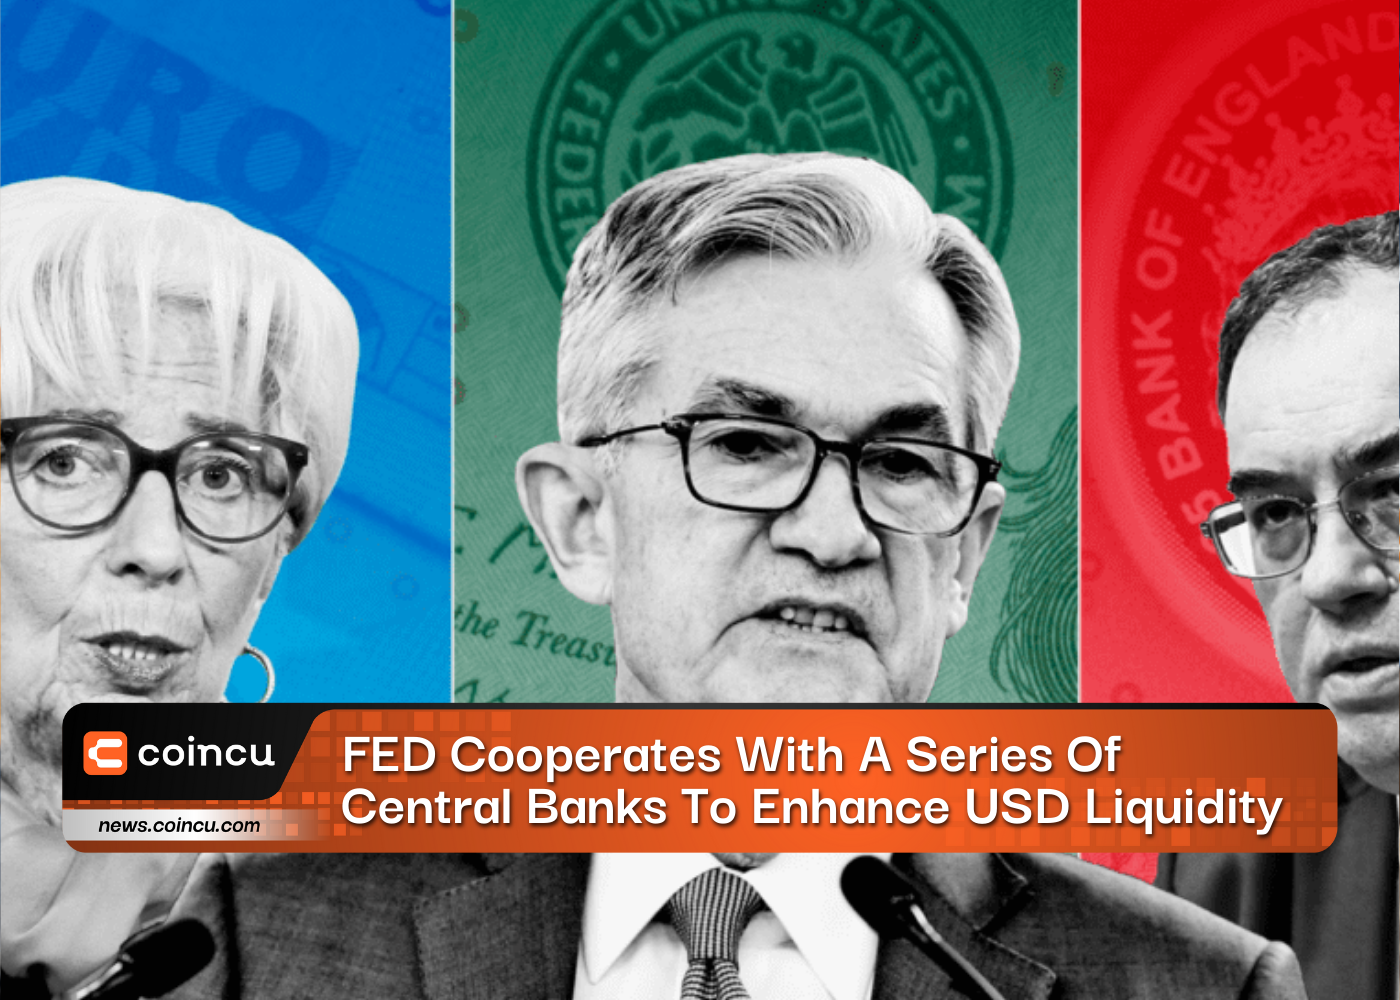 FED Cooperates With A Series Of Central Banks To Enhance USD Liquidity